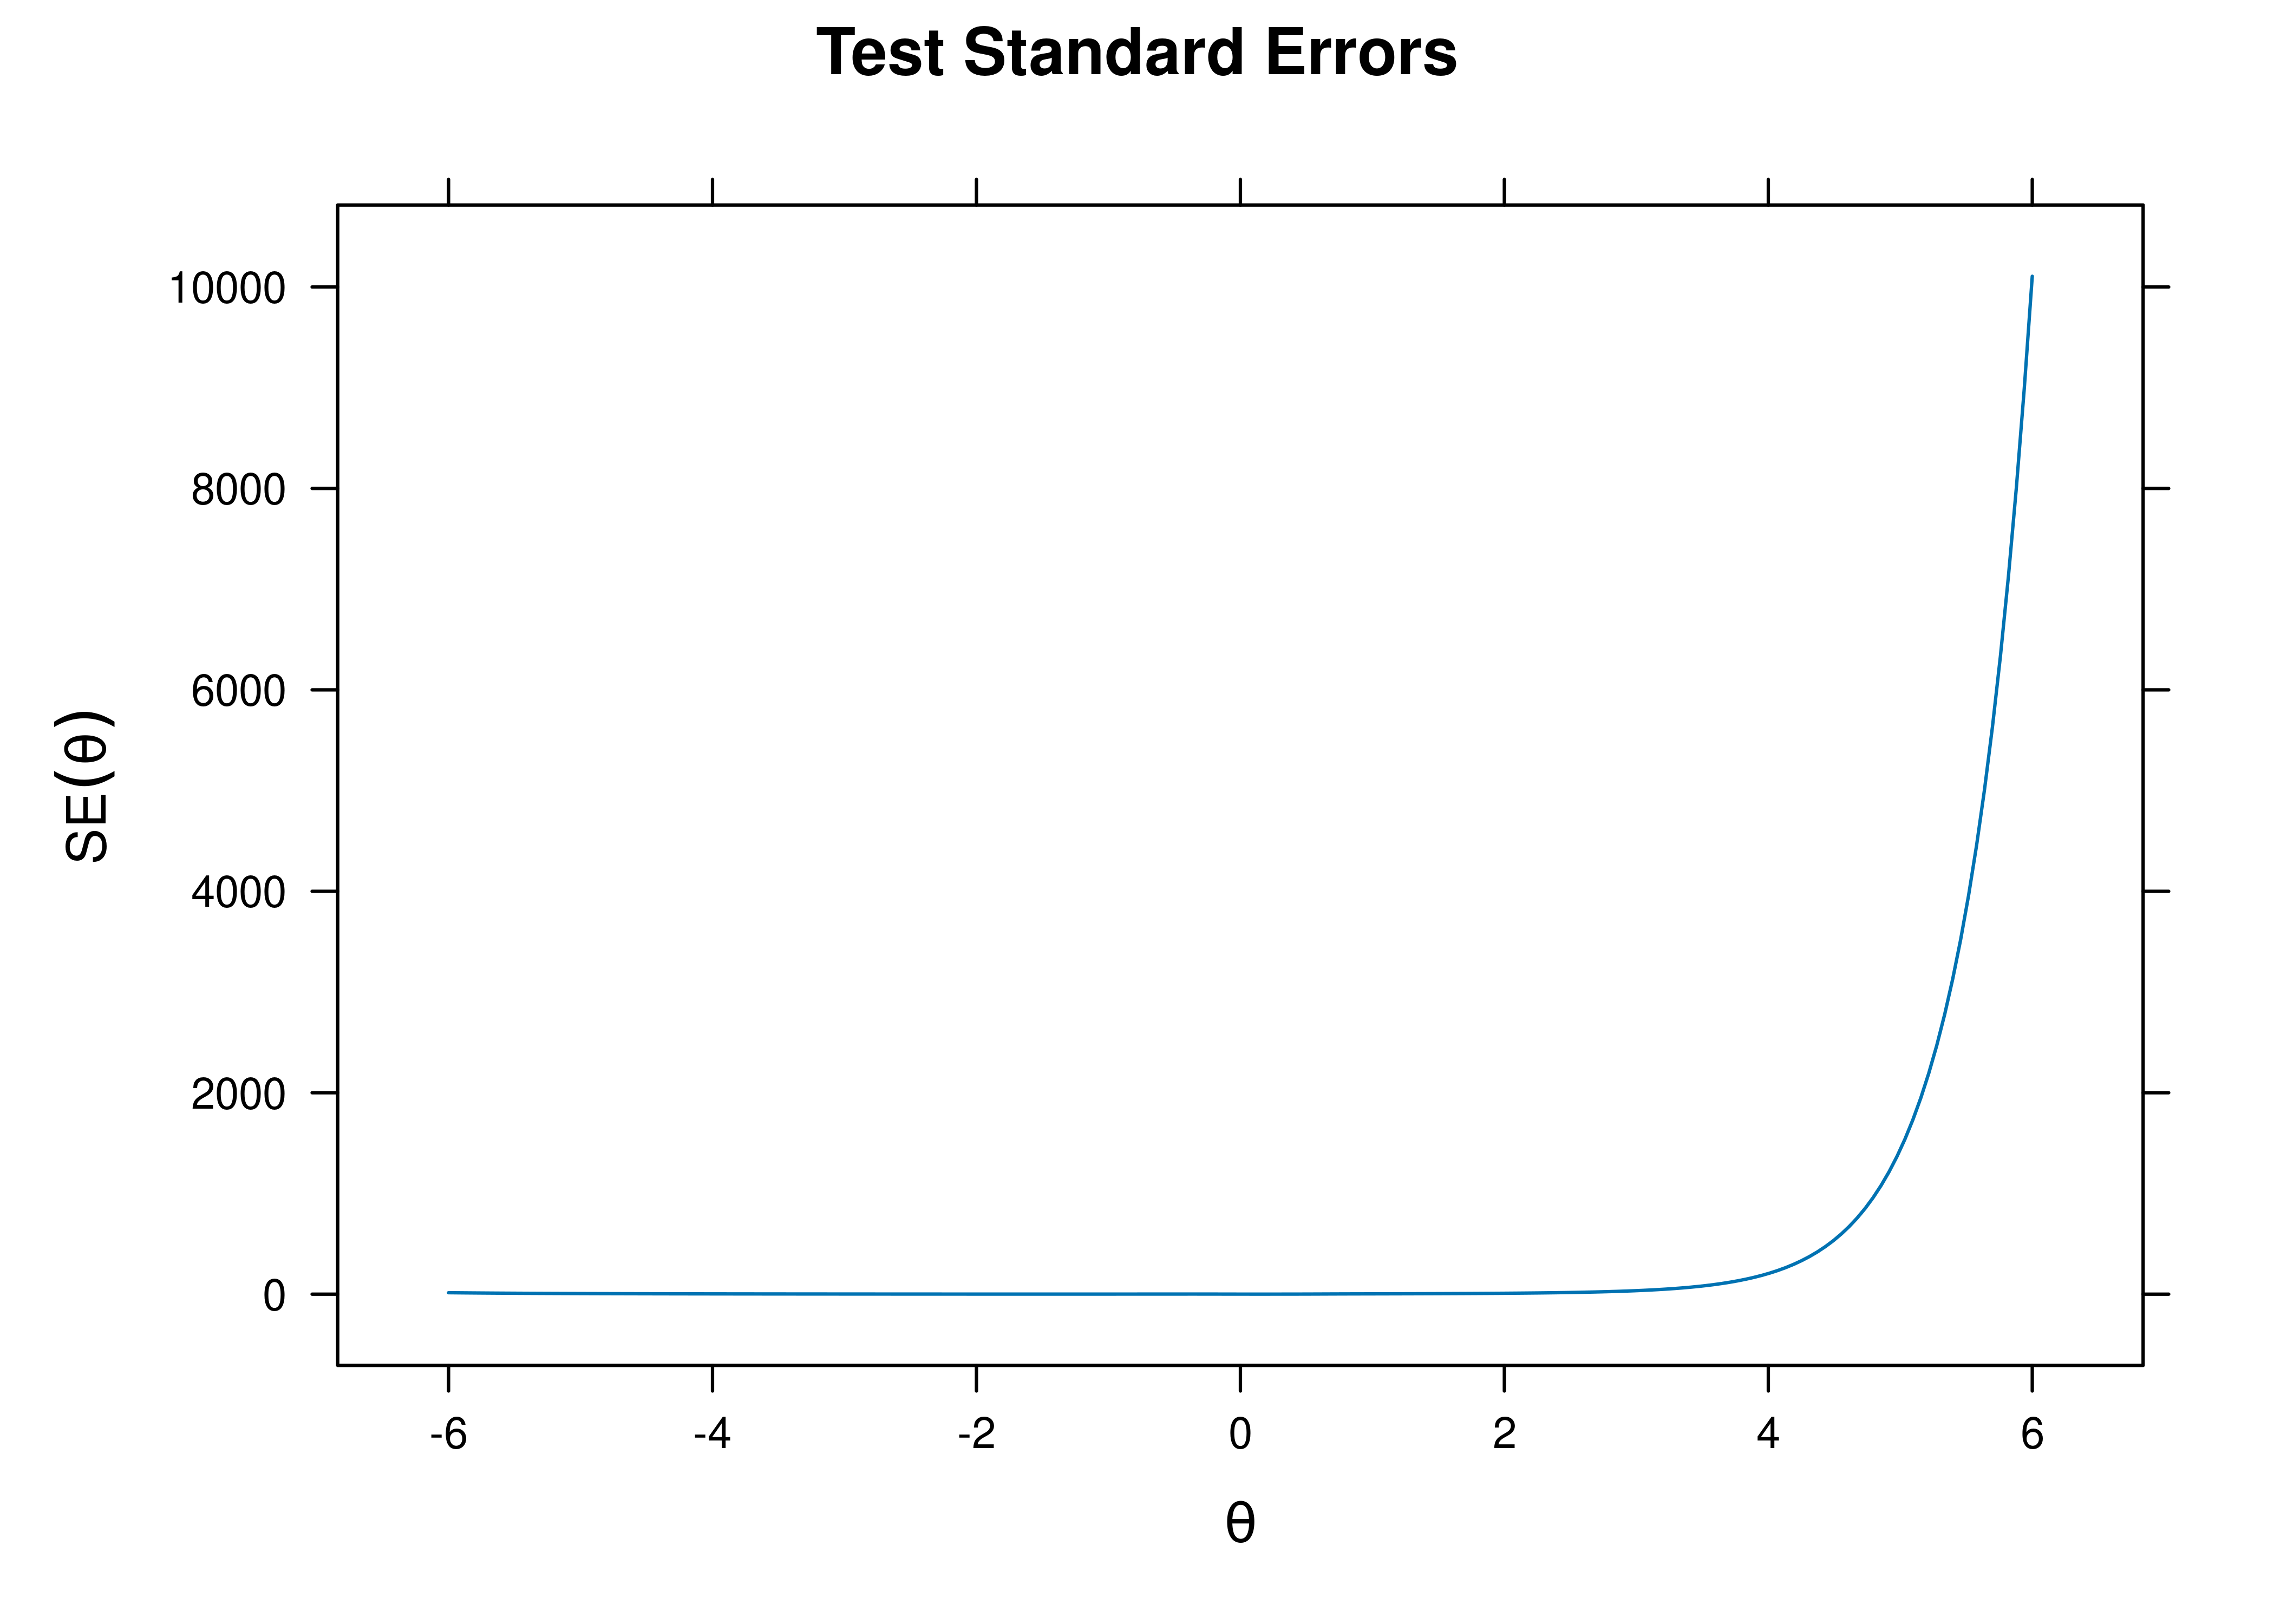 Test Standard Error of Measurement From Four-Parameter Logistic Item Response Theory Model.